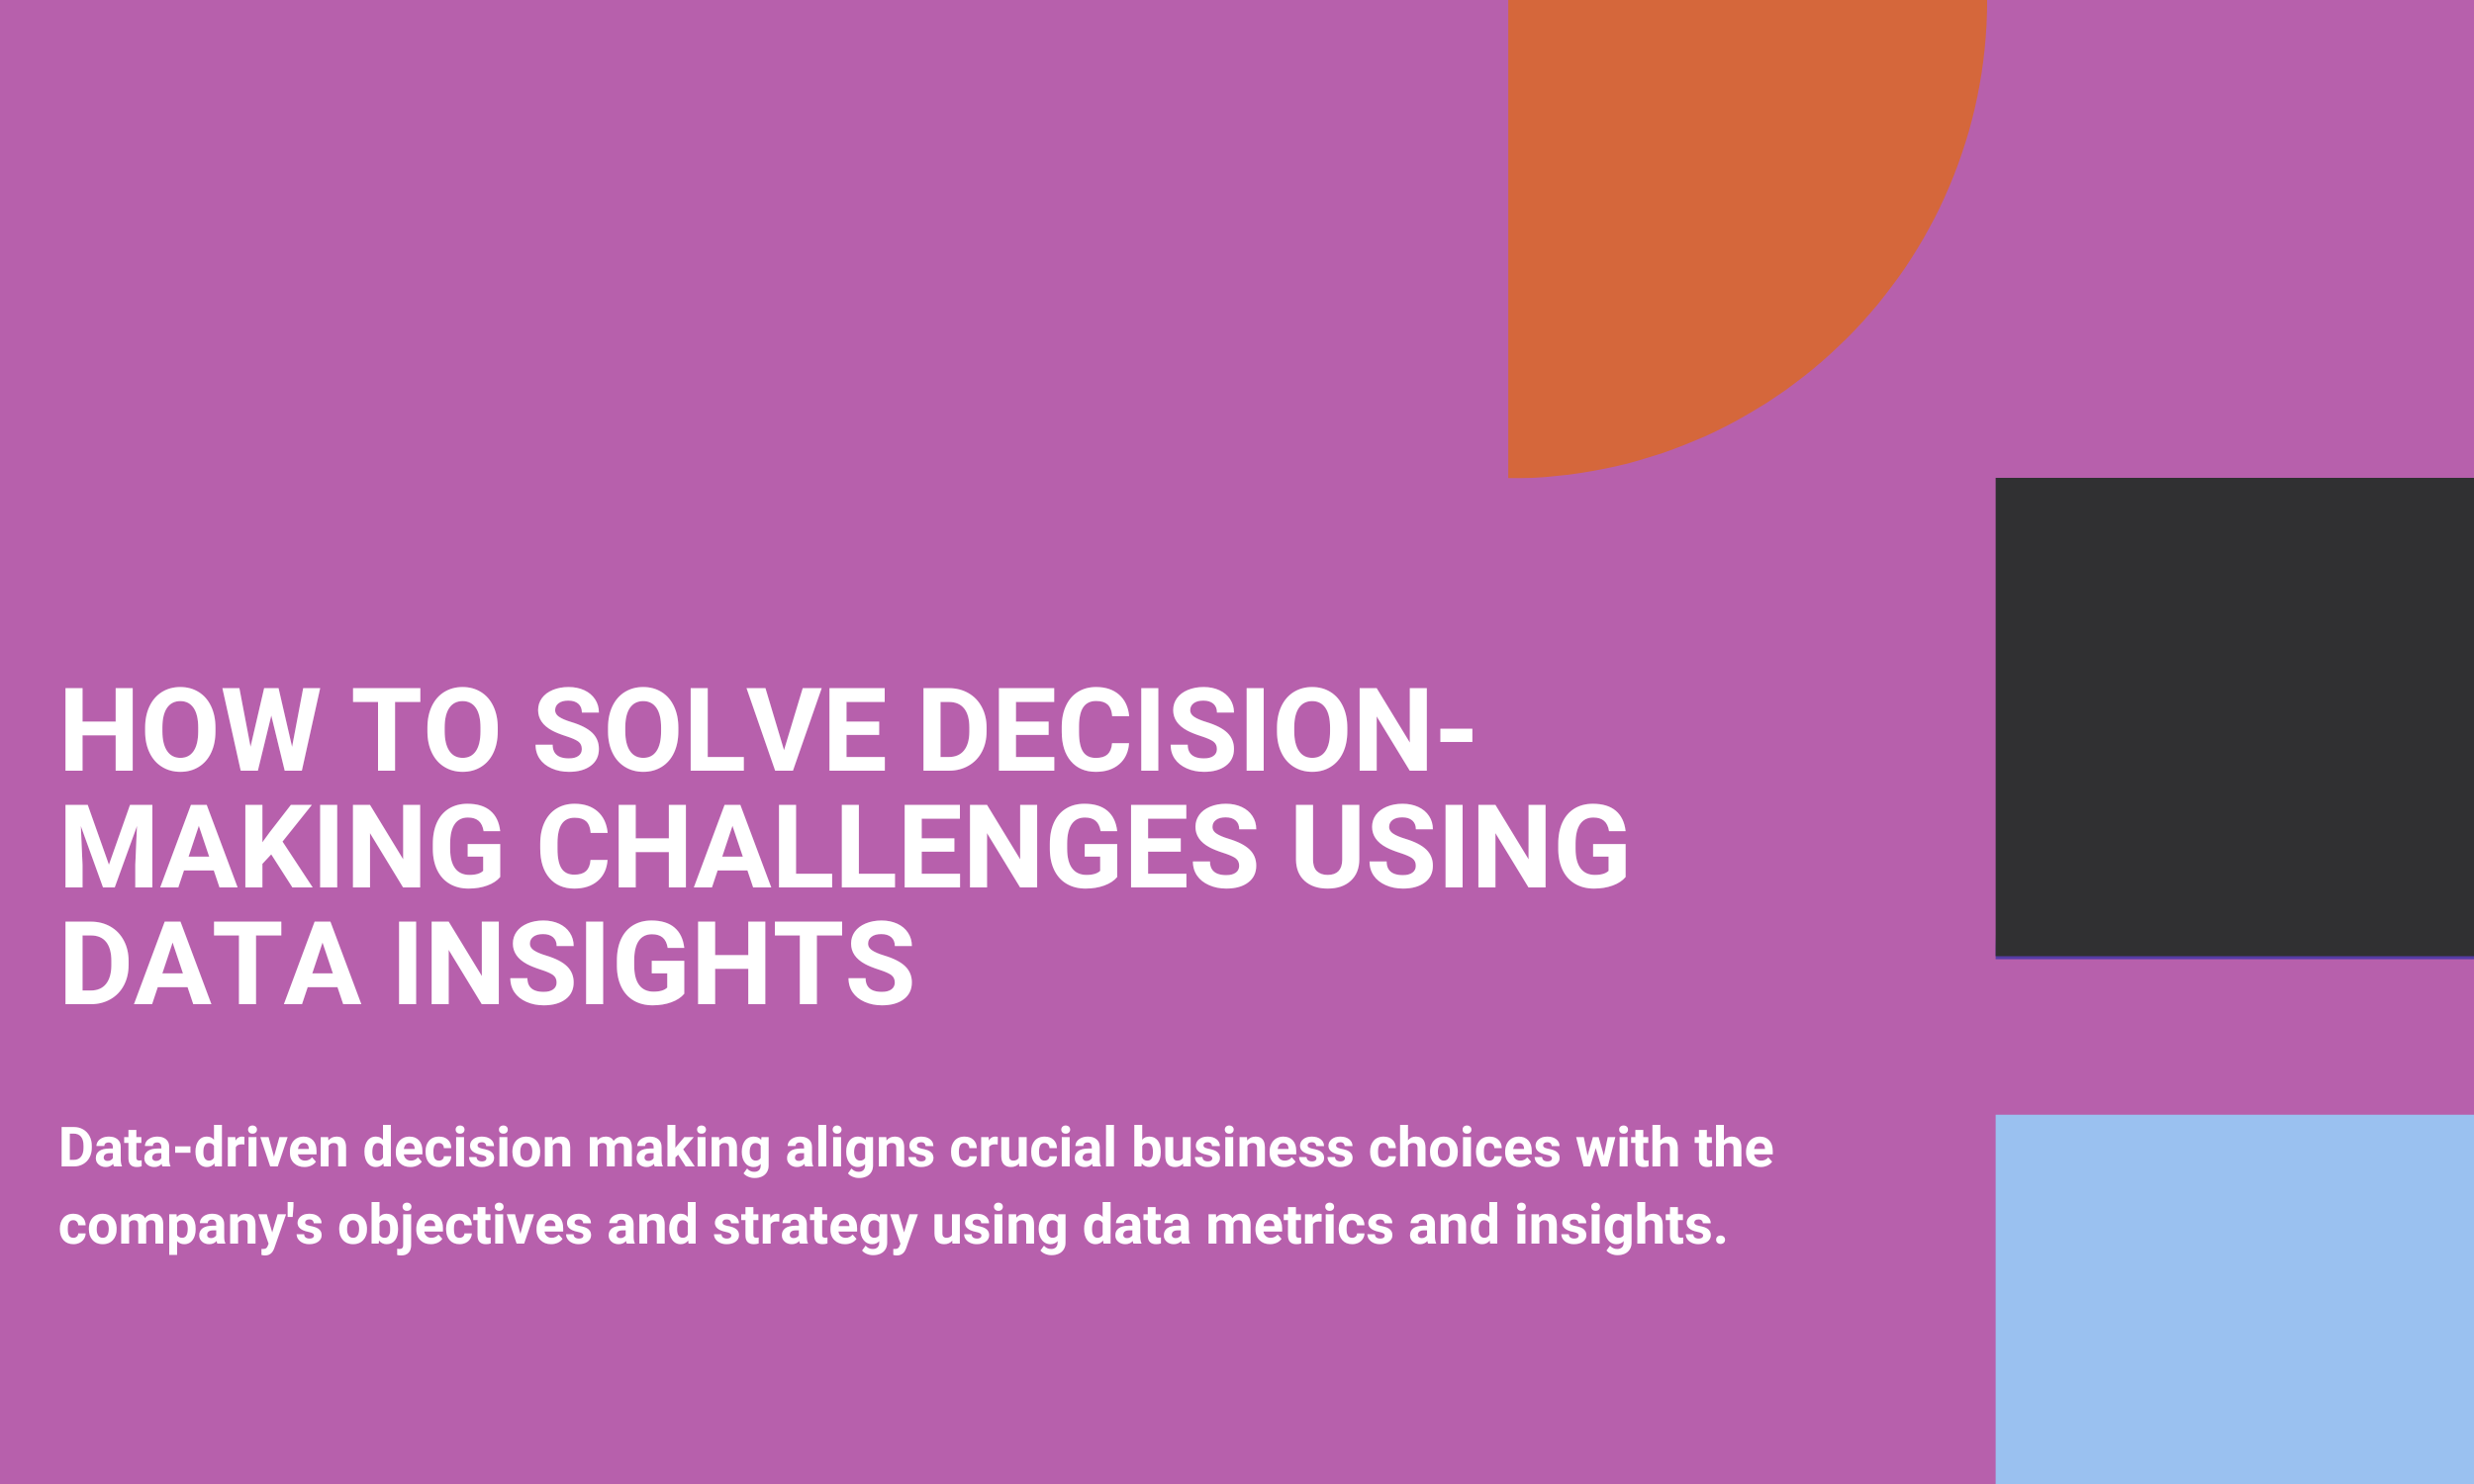 How to Solve Decision-Making Challenges Using Data Insights